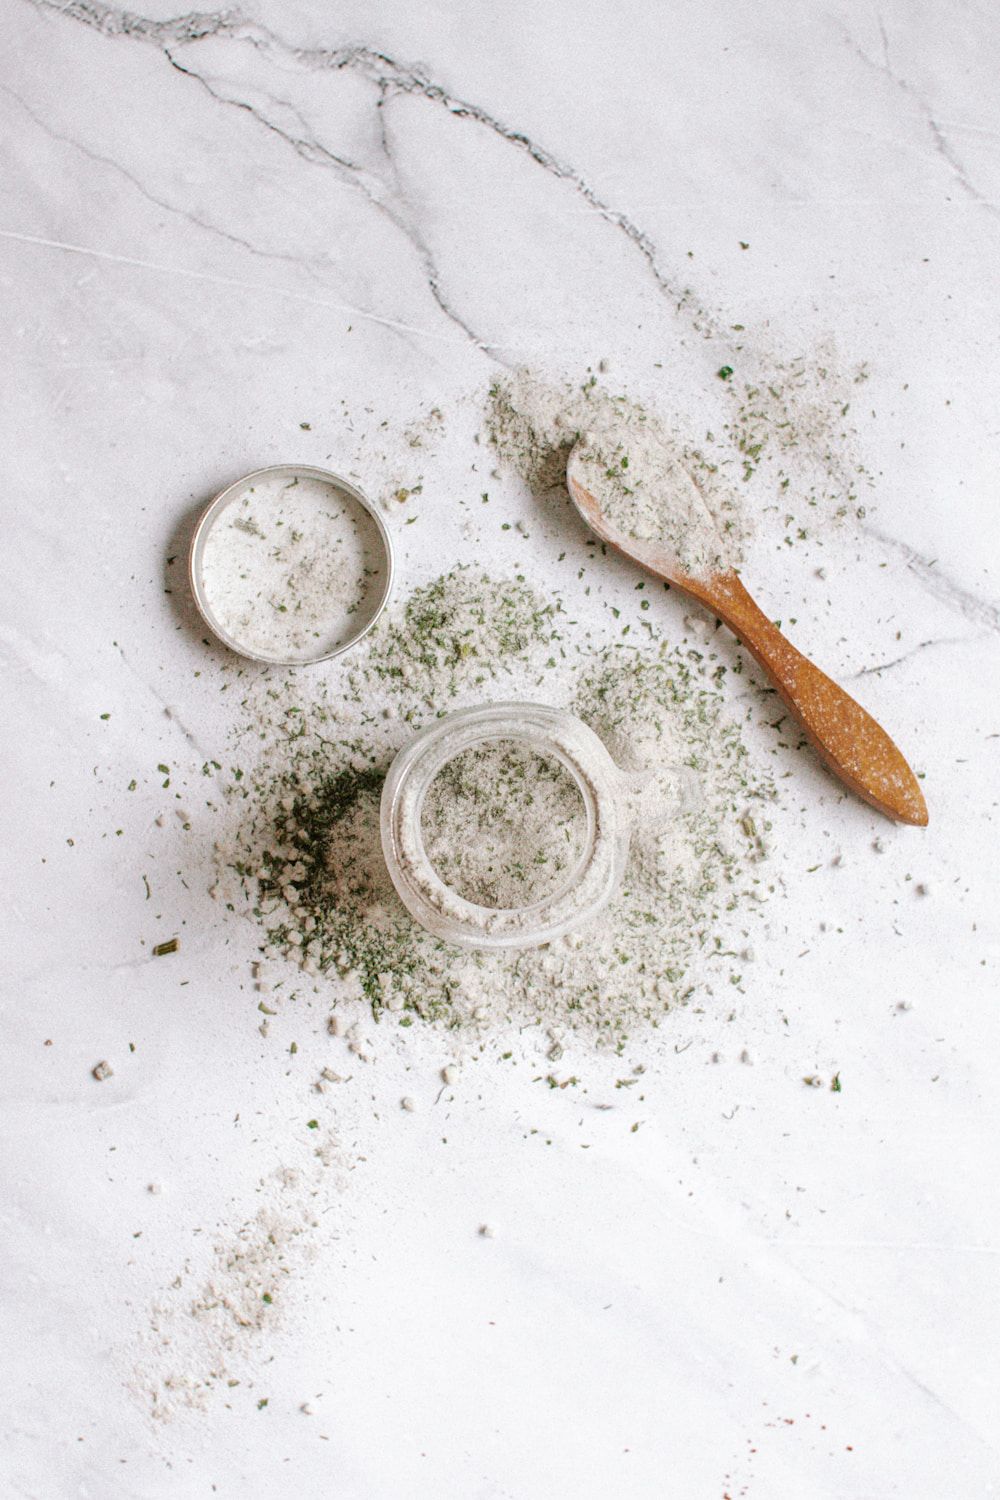 Jar of homemade ranch seasoning with a wooden spoon and dried herbs.